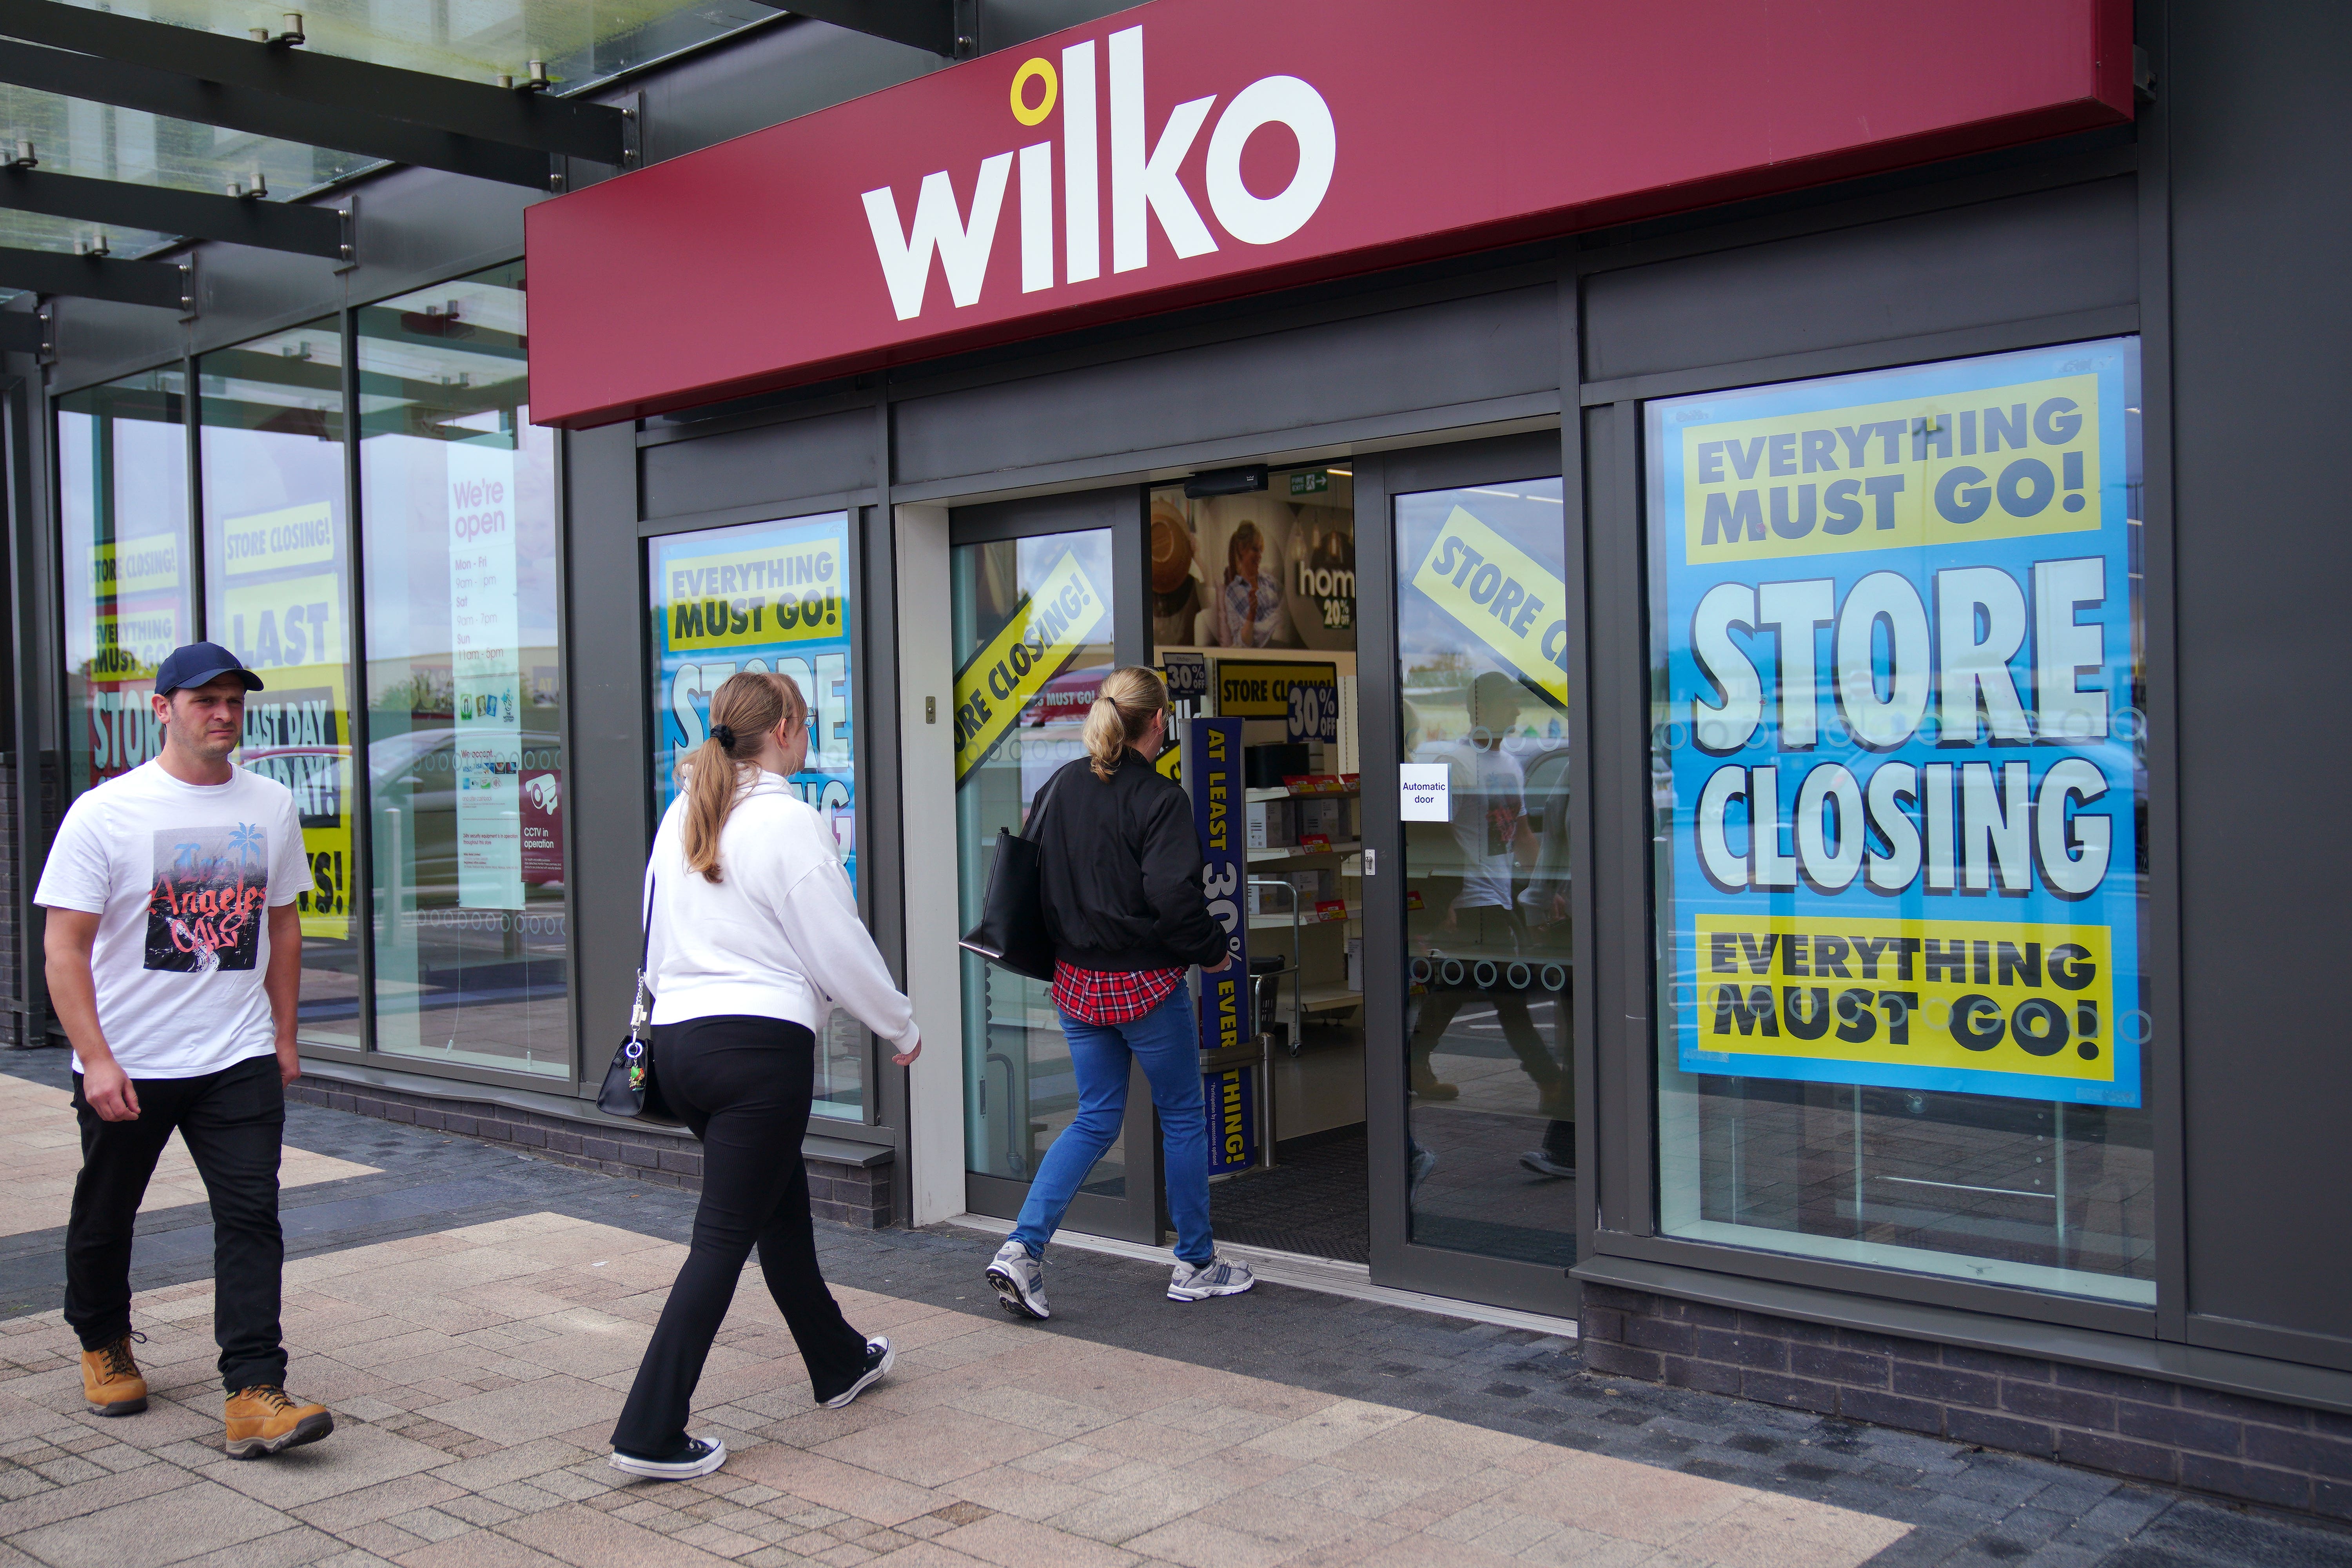 The retailer has revealed the locations of stores to shut next week